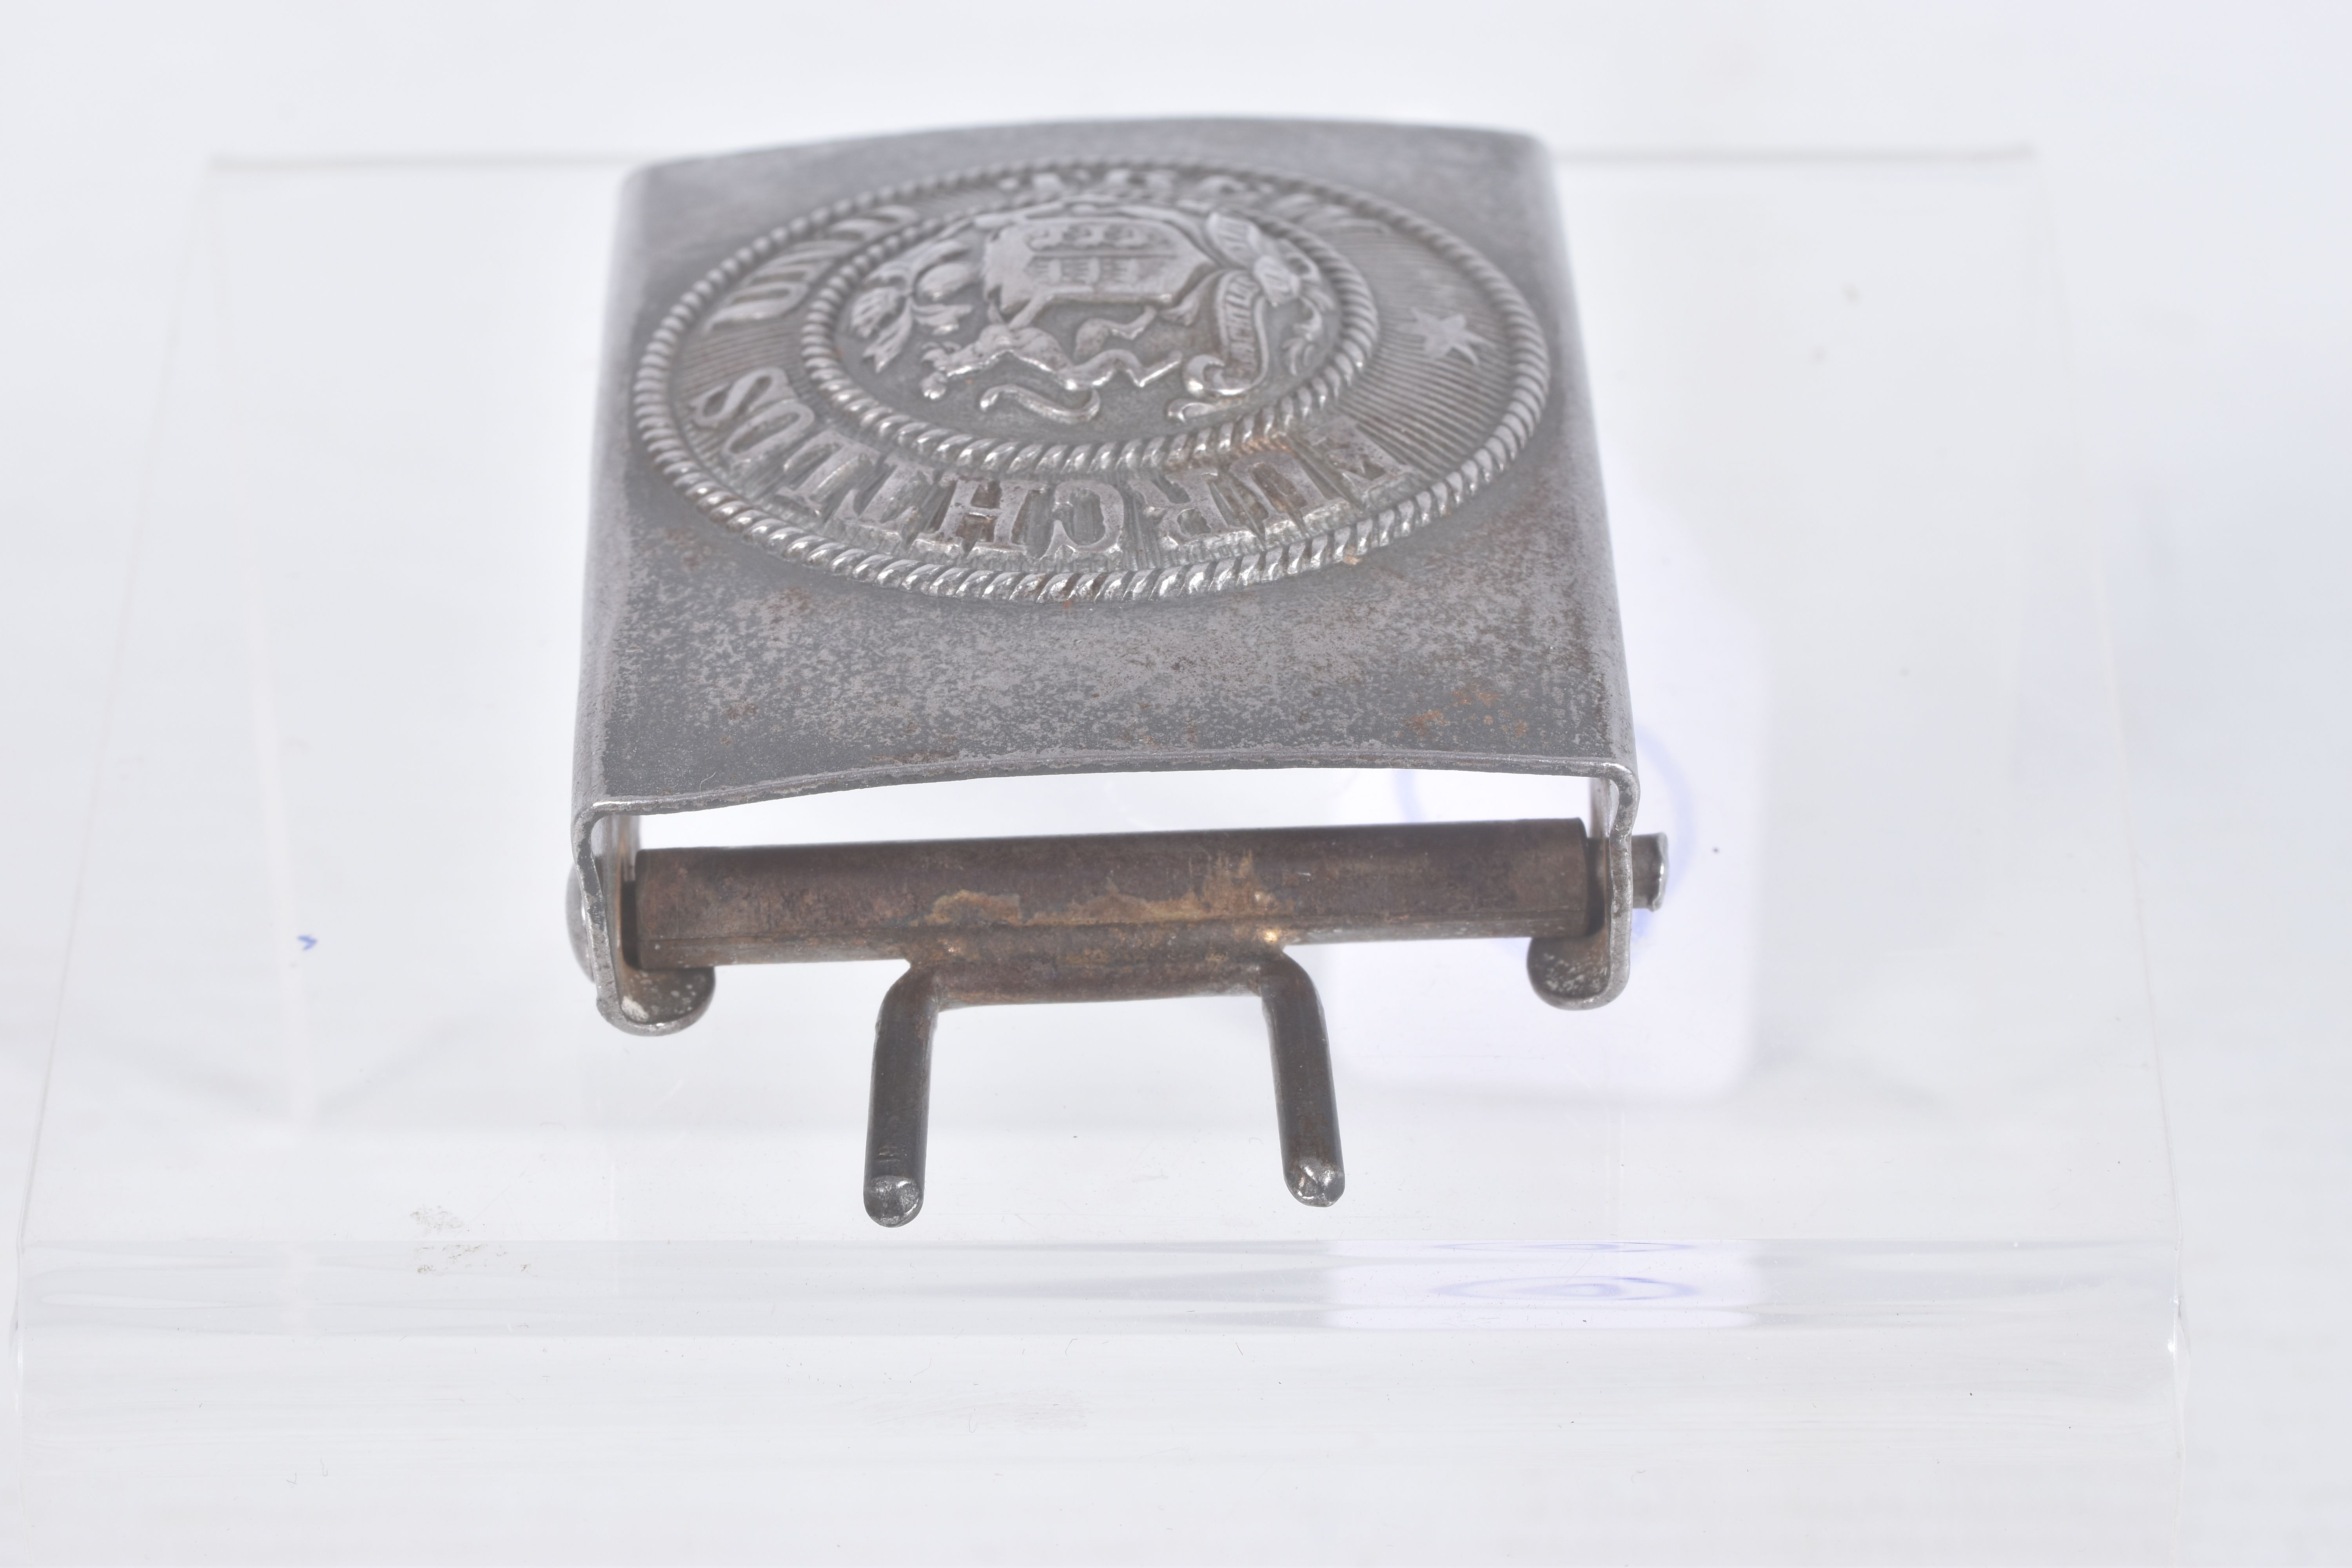 TWO WWI ERA IMPERIAL GERMANY BELT BUCKLES, the first has a crown in the centre and the words Gott - Image 6 of 13